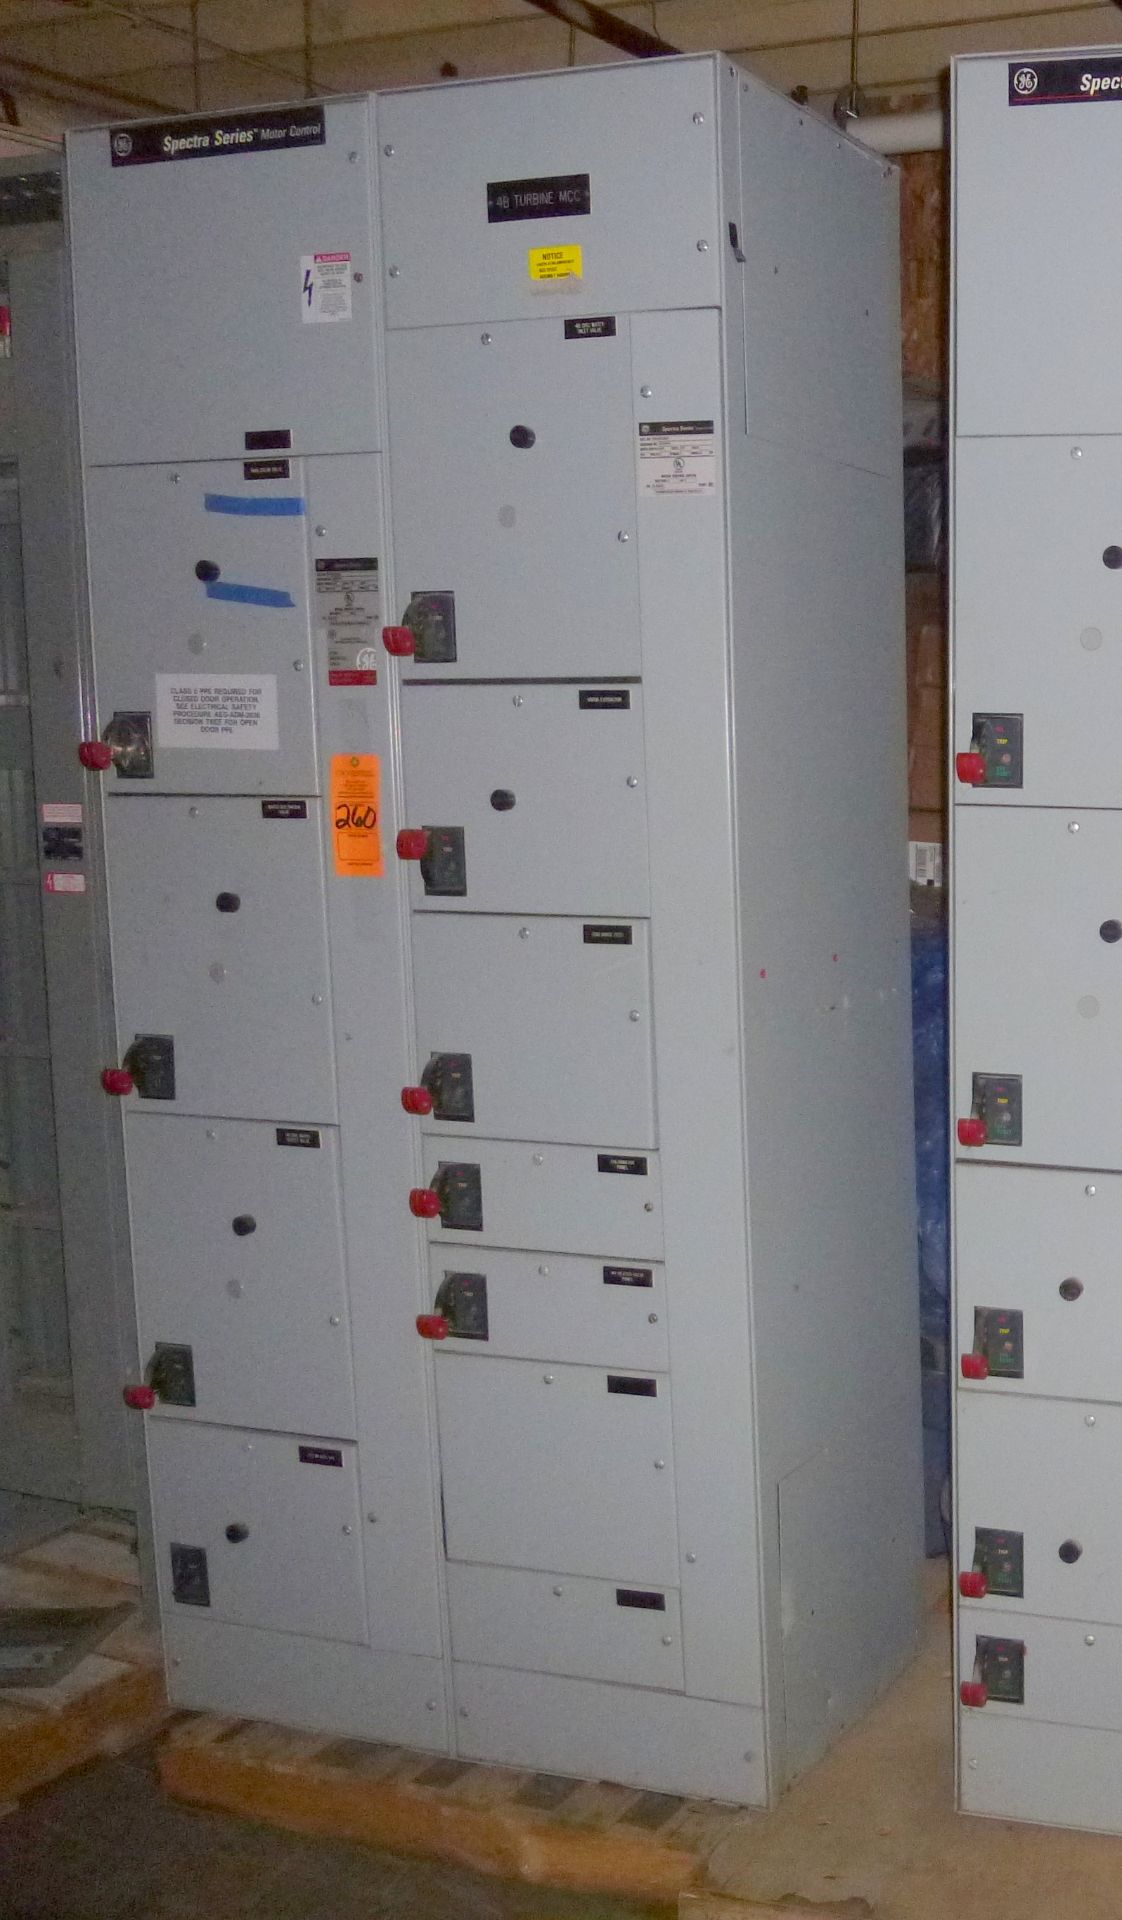 GE Spectra Series Motor control center MCC, catalog number 0691X0868A02, 600amp supply, 600amp